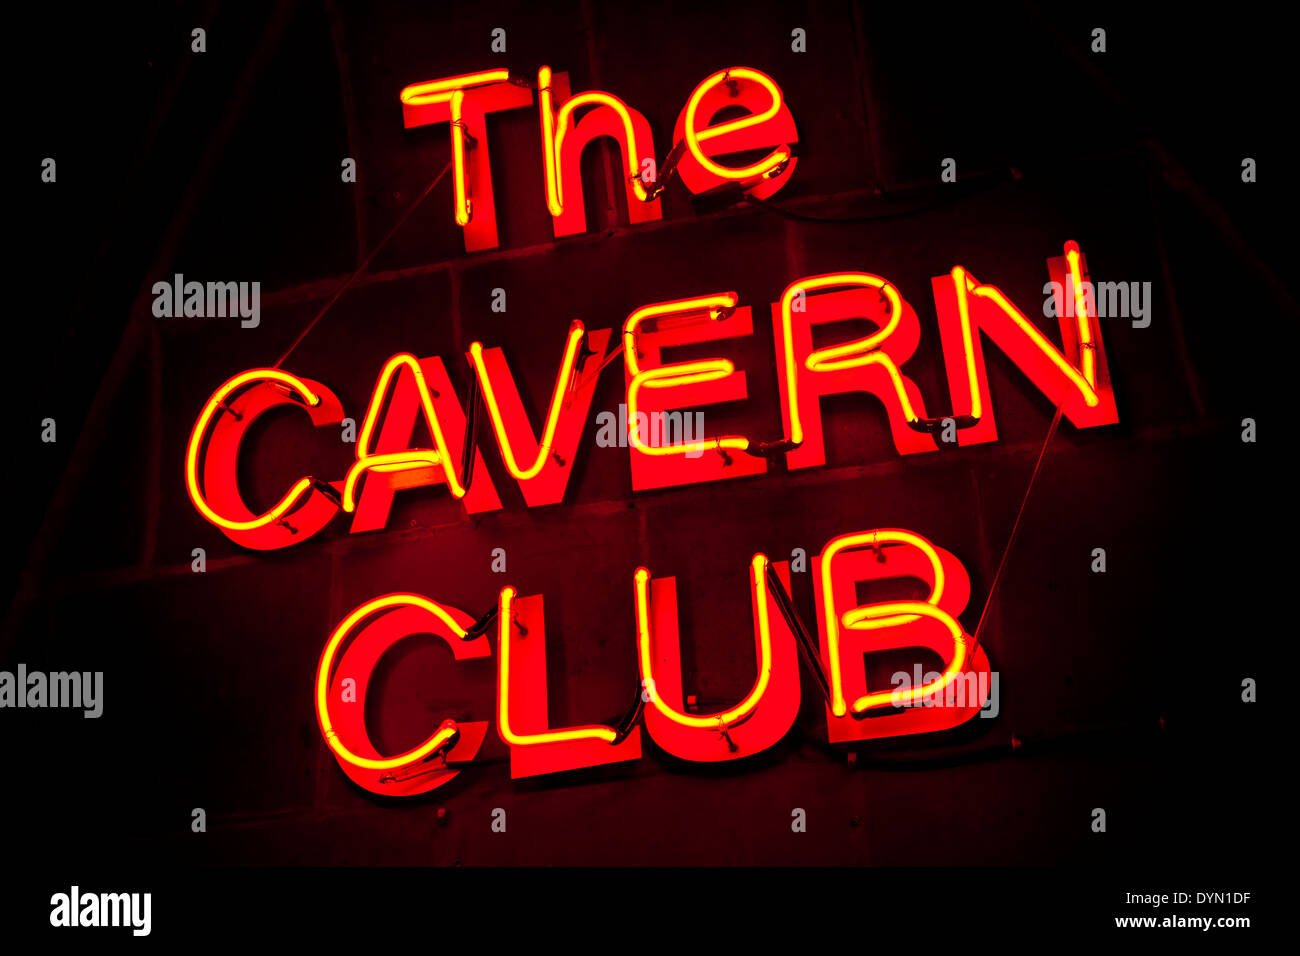 The neon sign for the historic Cavern Club in Liverpool. One of the venues in which 'The Beatles' started their career. Stock Photo